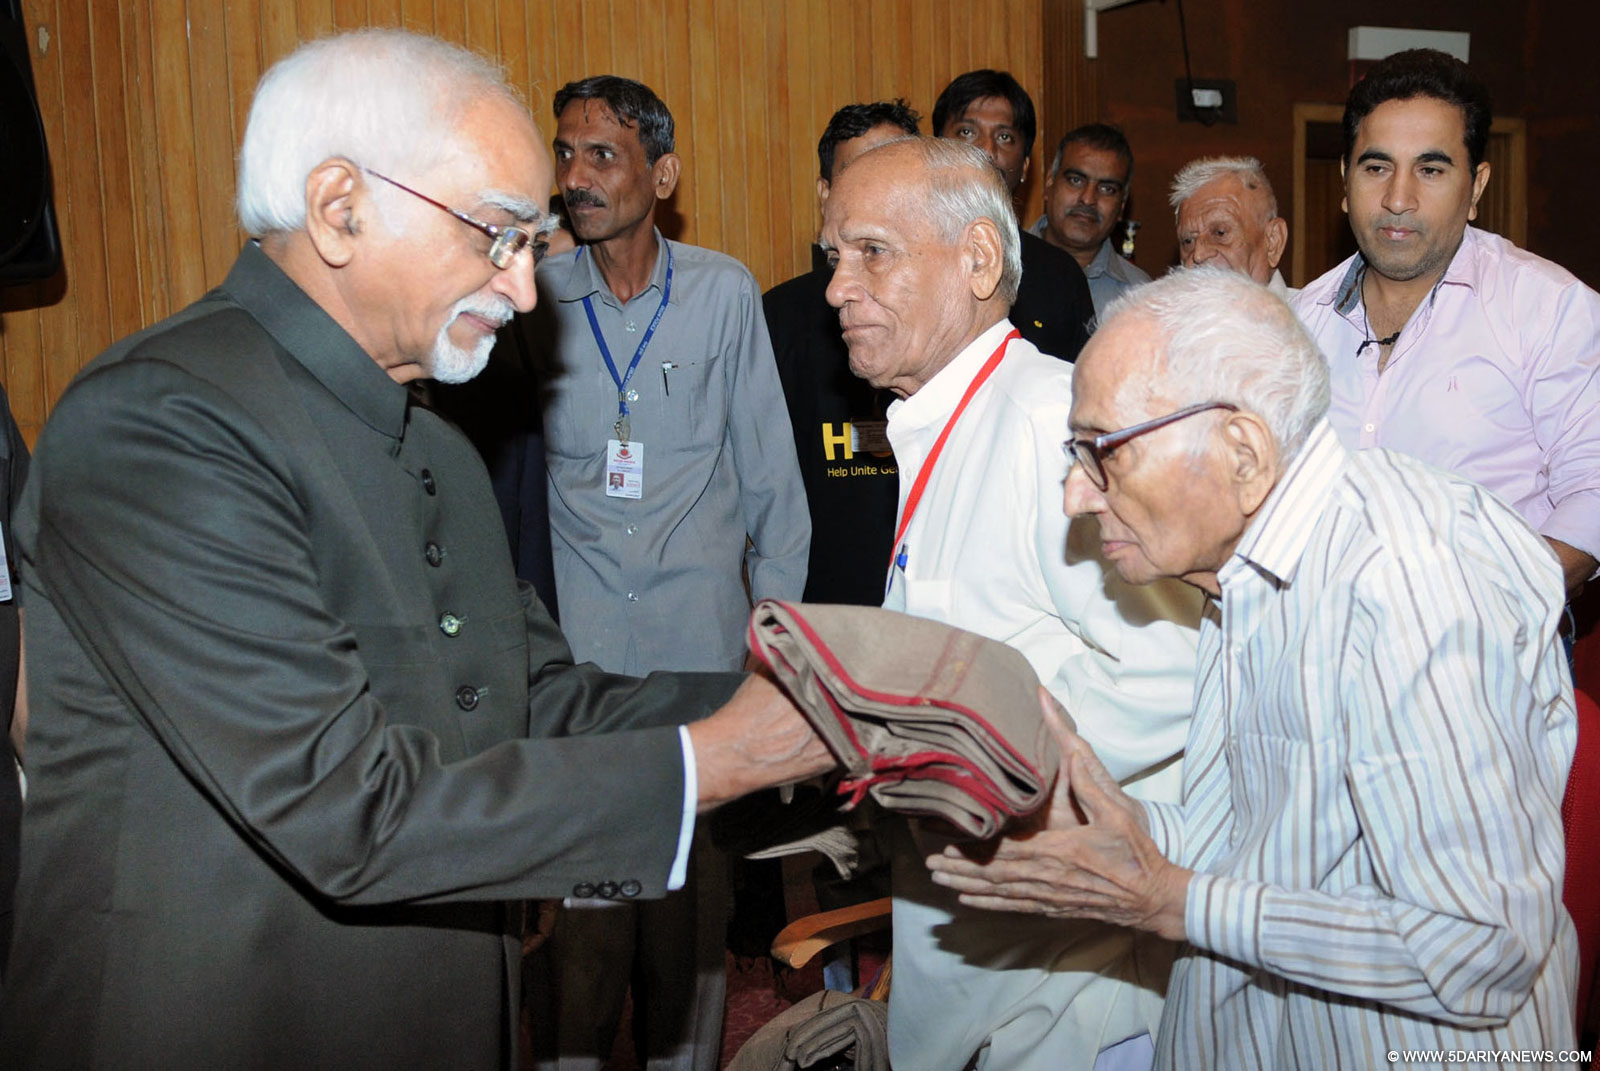 The Vice President, Shri Mohd. Hamid Ansari felicitated the senior citizens, on the occasion of the International Day of Older Persons, organised by the Helpage India, in New Delhi on October 01, 2015.